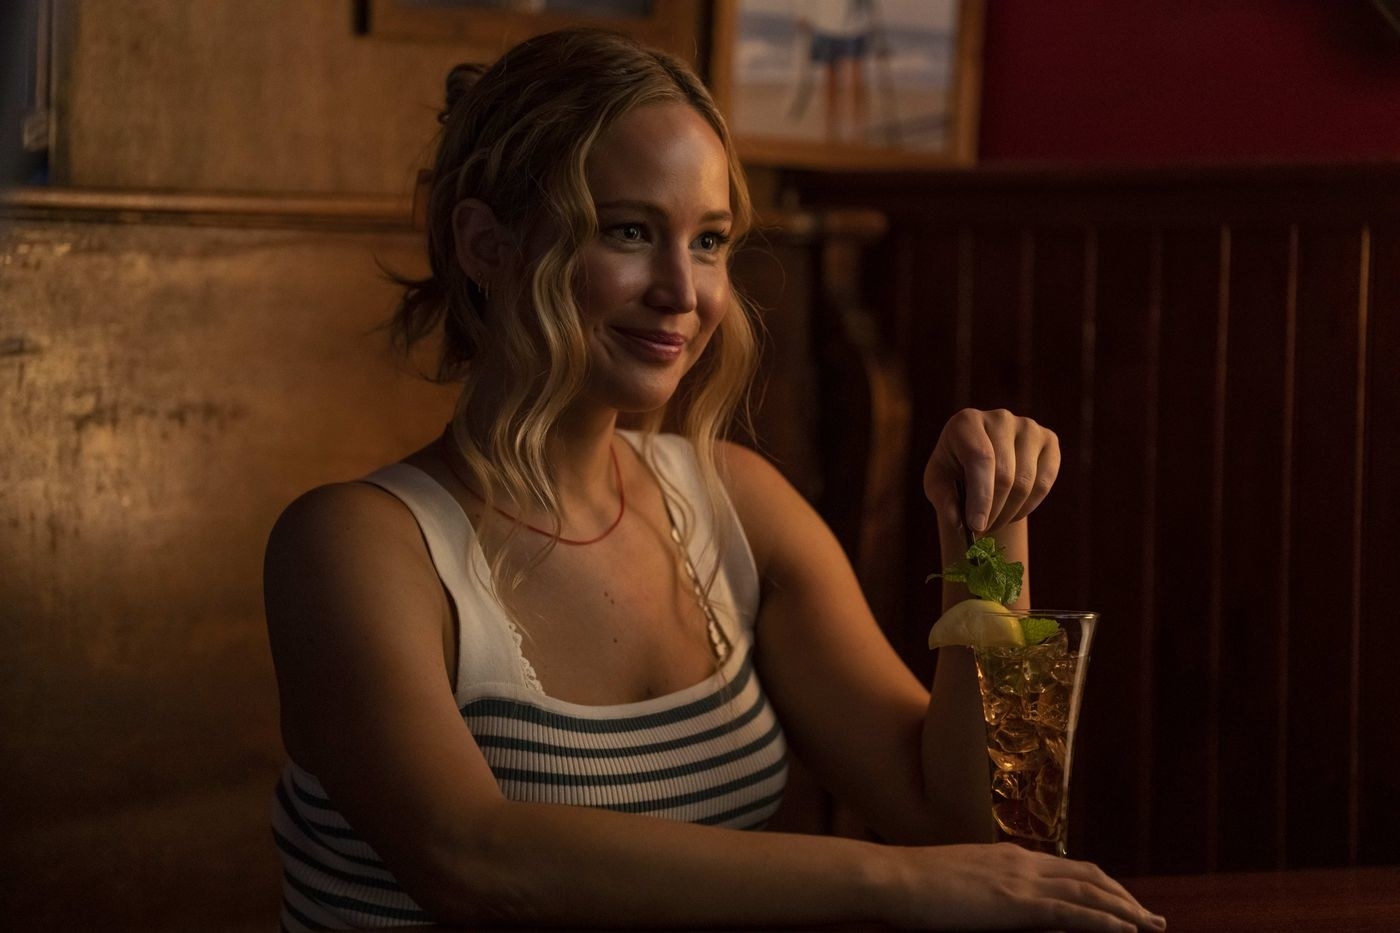 Close-up of Jennifer smiling and sitting in a dining booth with a drink in front of her